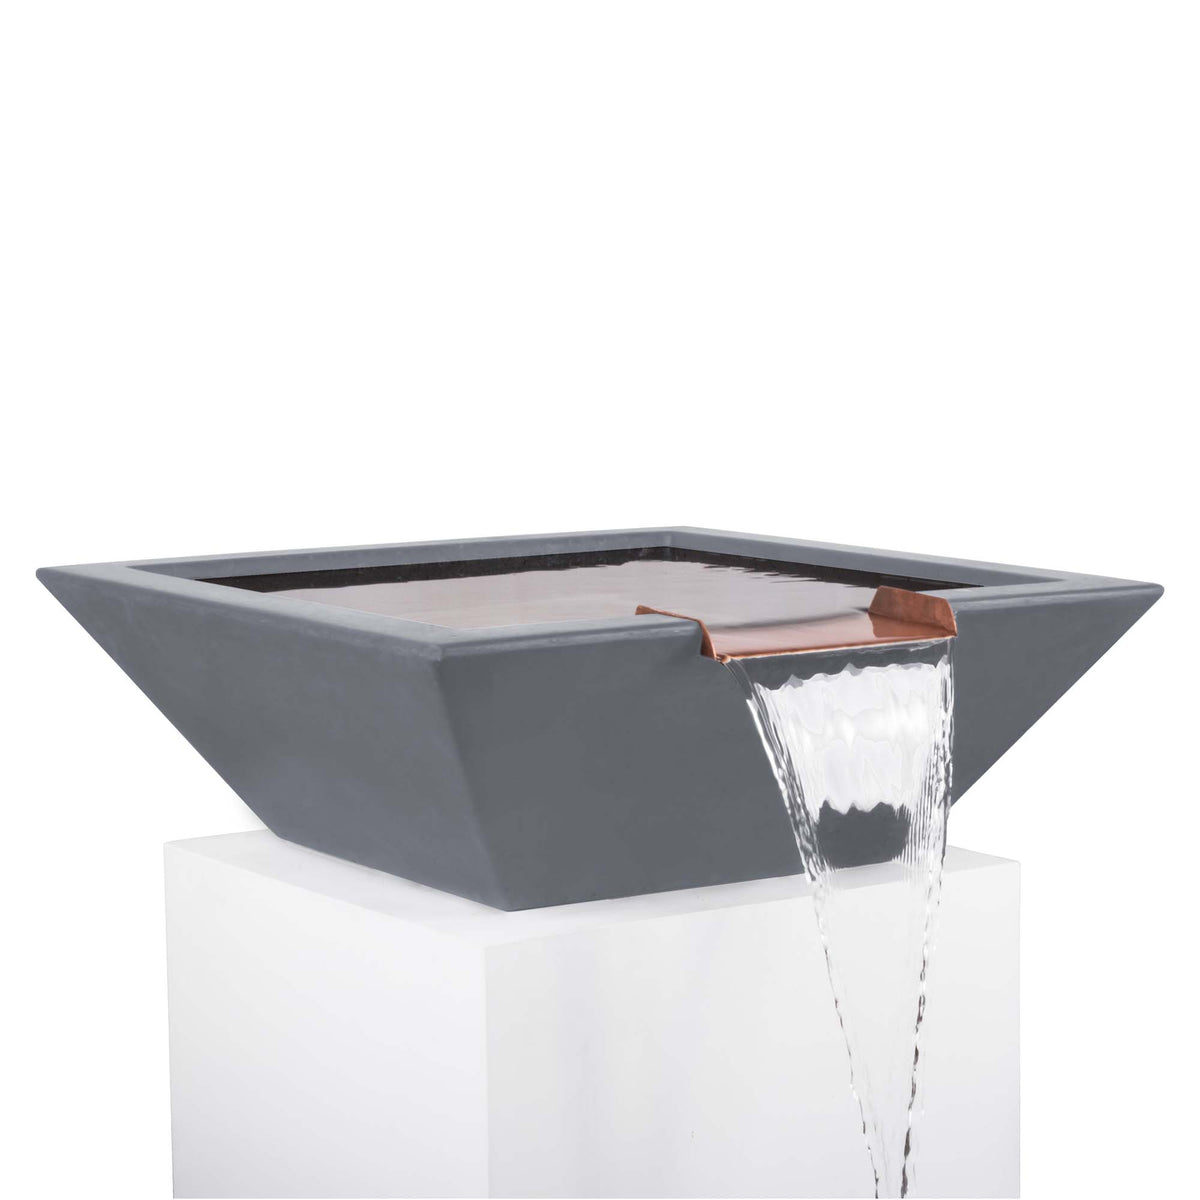 The Outdoor Plus Maya GFRC Concrete Square Water Bowl in Gray